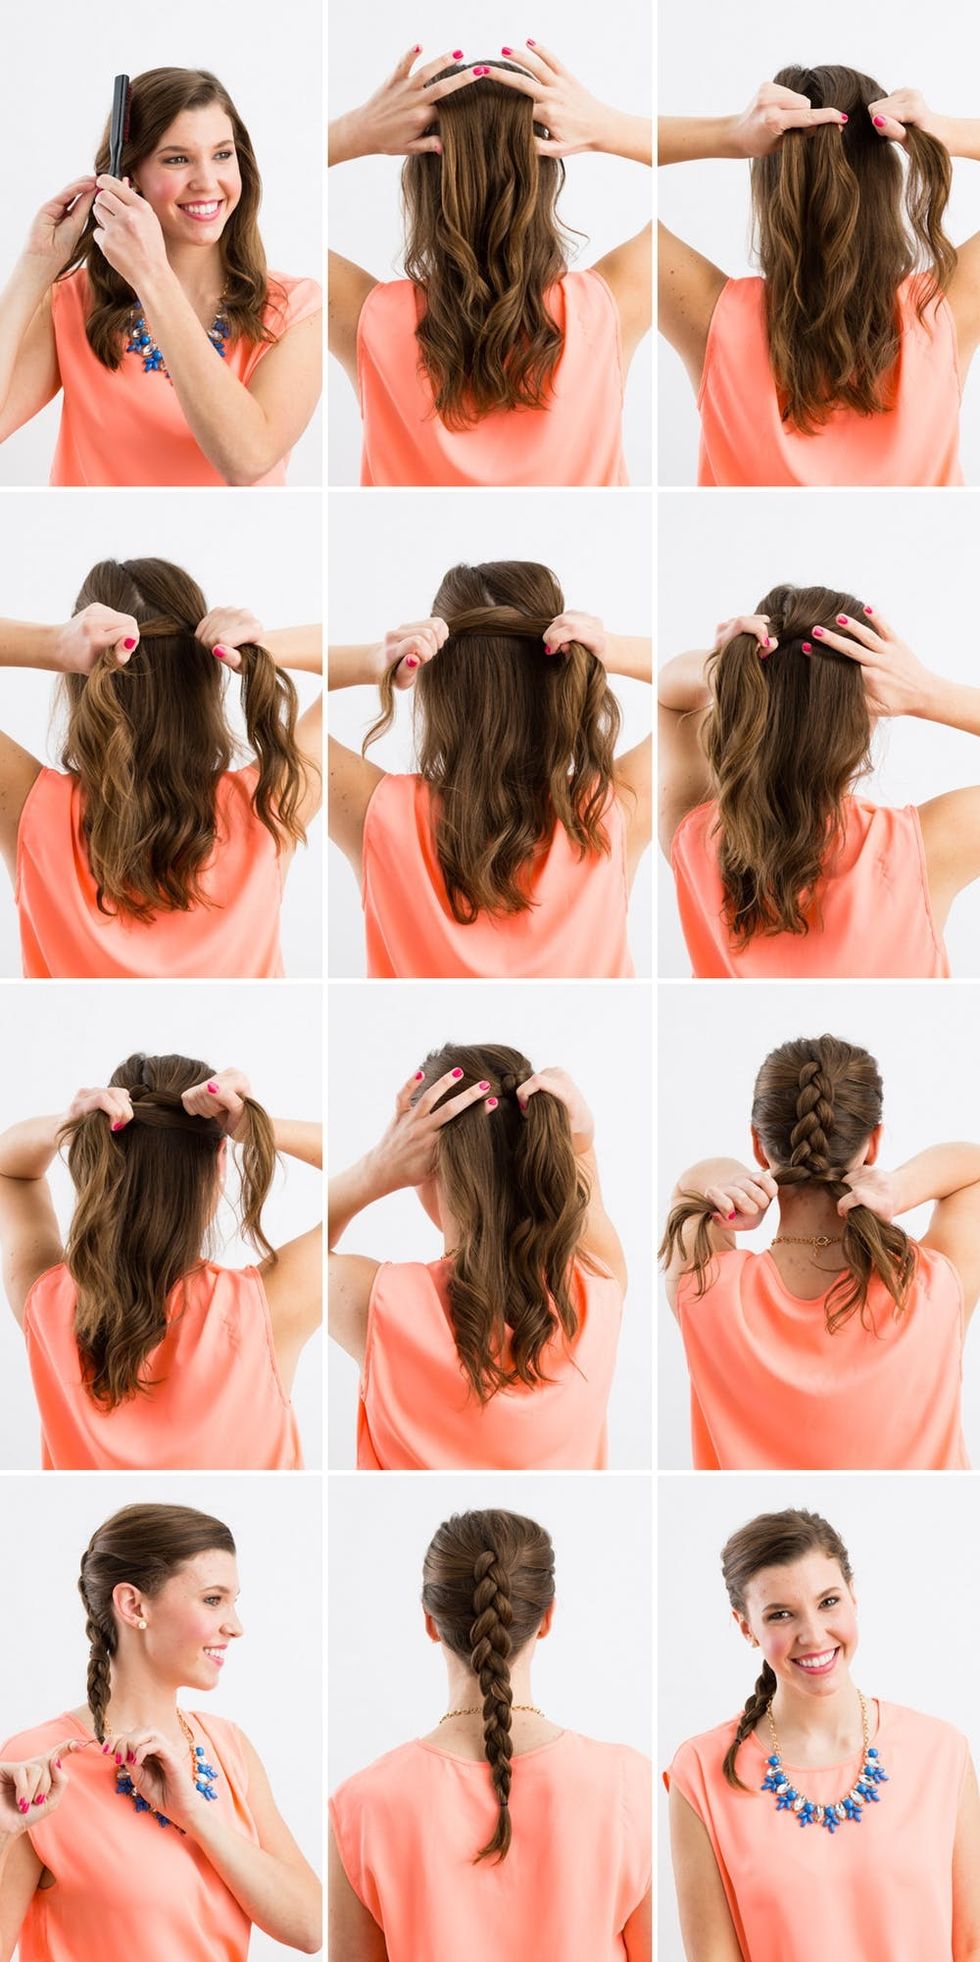 Braiding 101 Fishtail French And Dutch Inside Out Braids